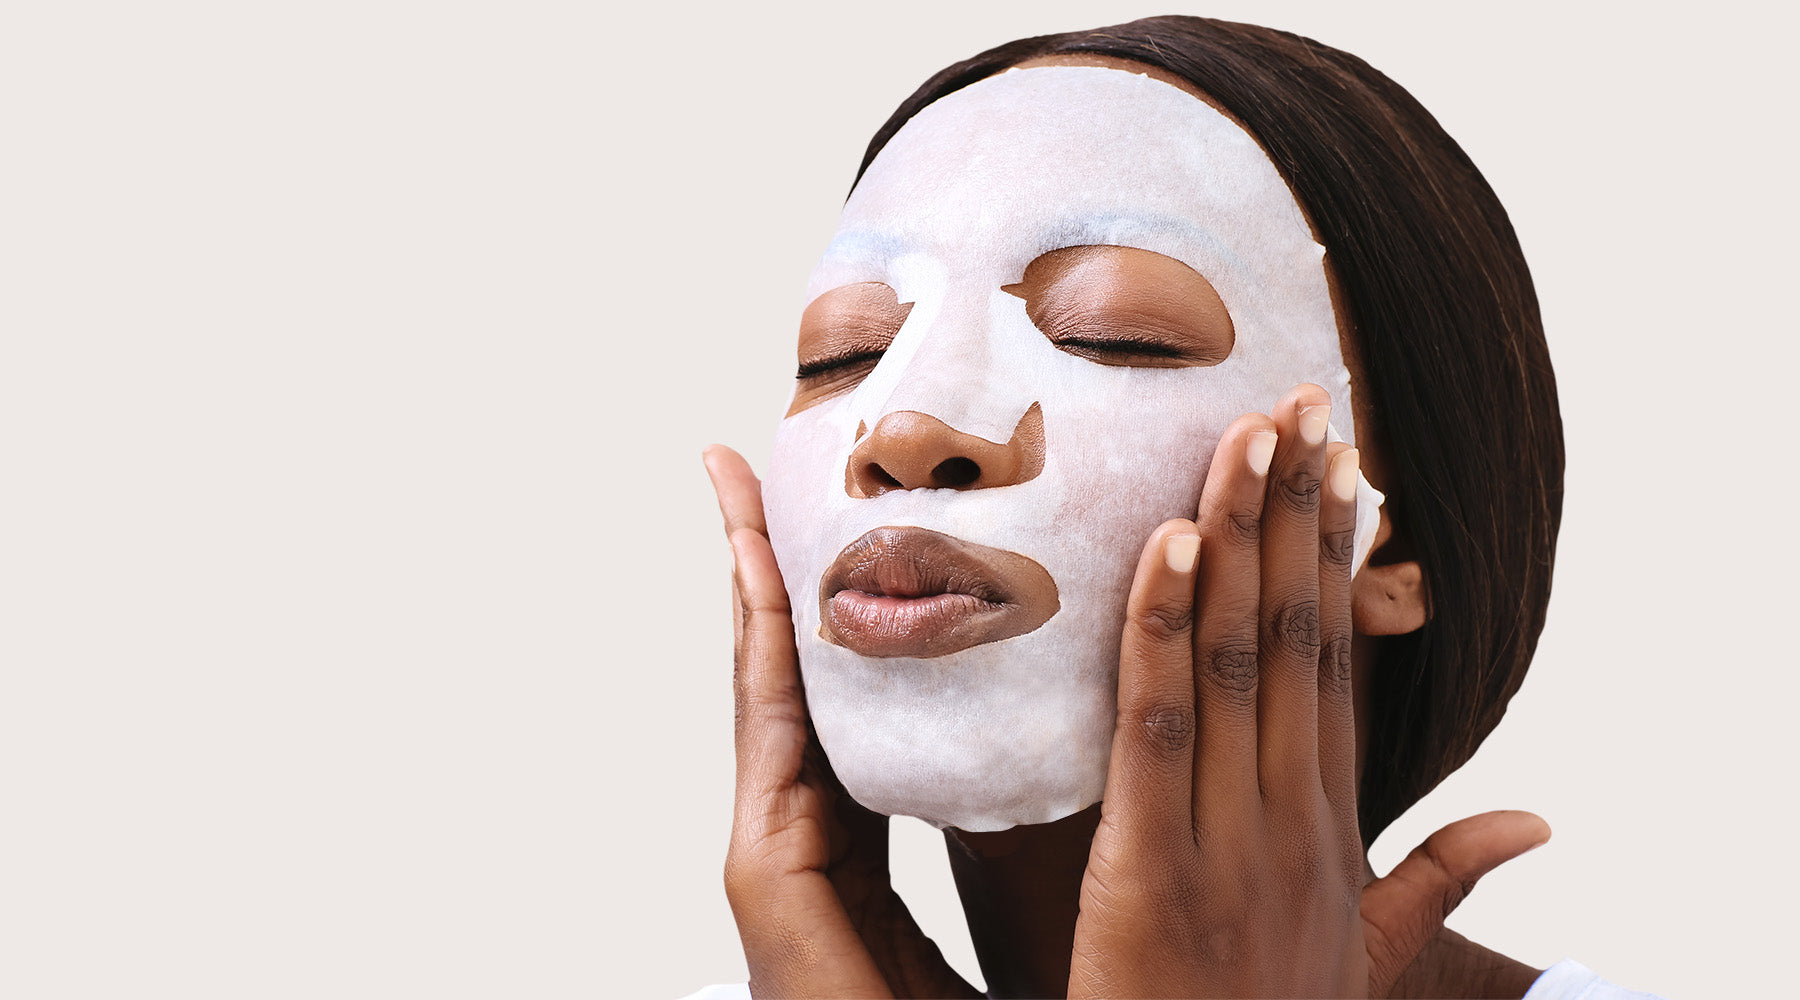 How-To Guide: The Ultimate At-Home Facial